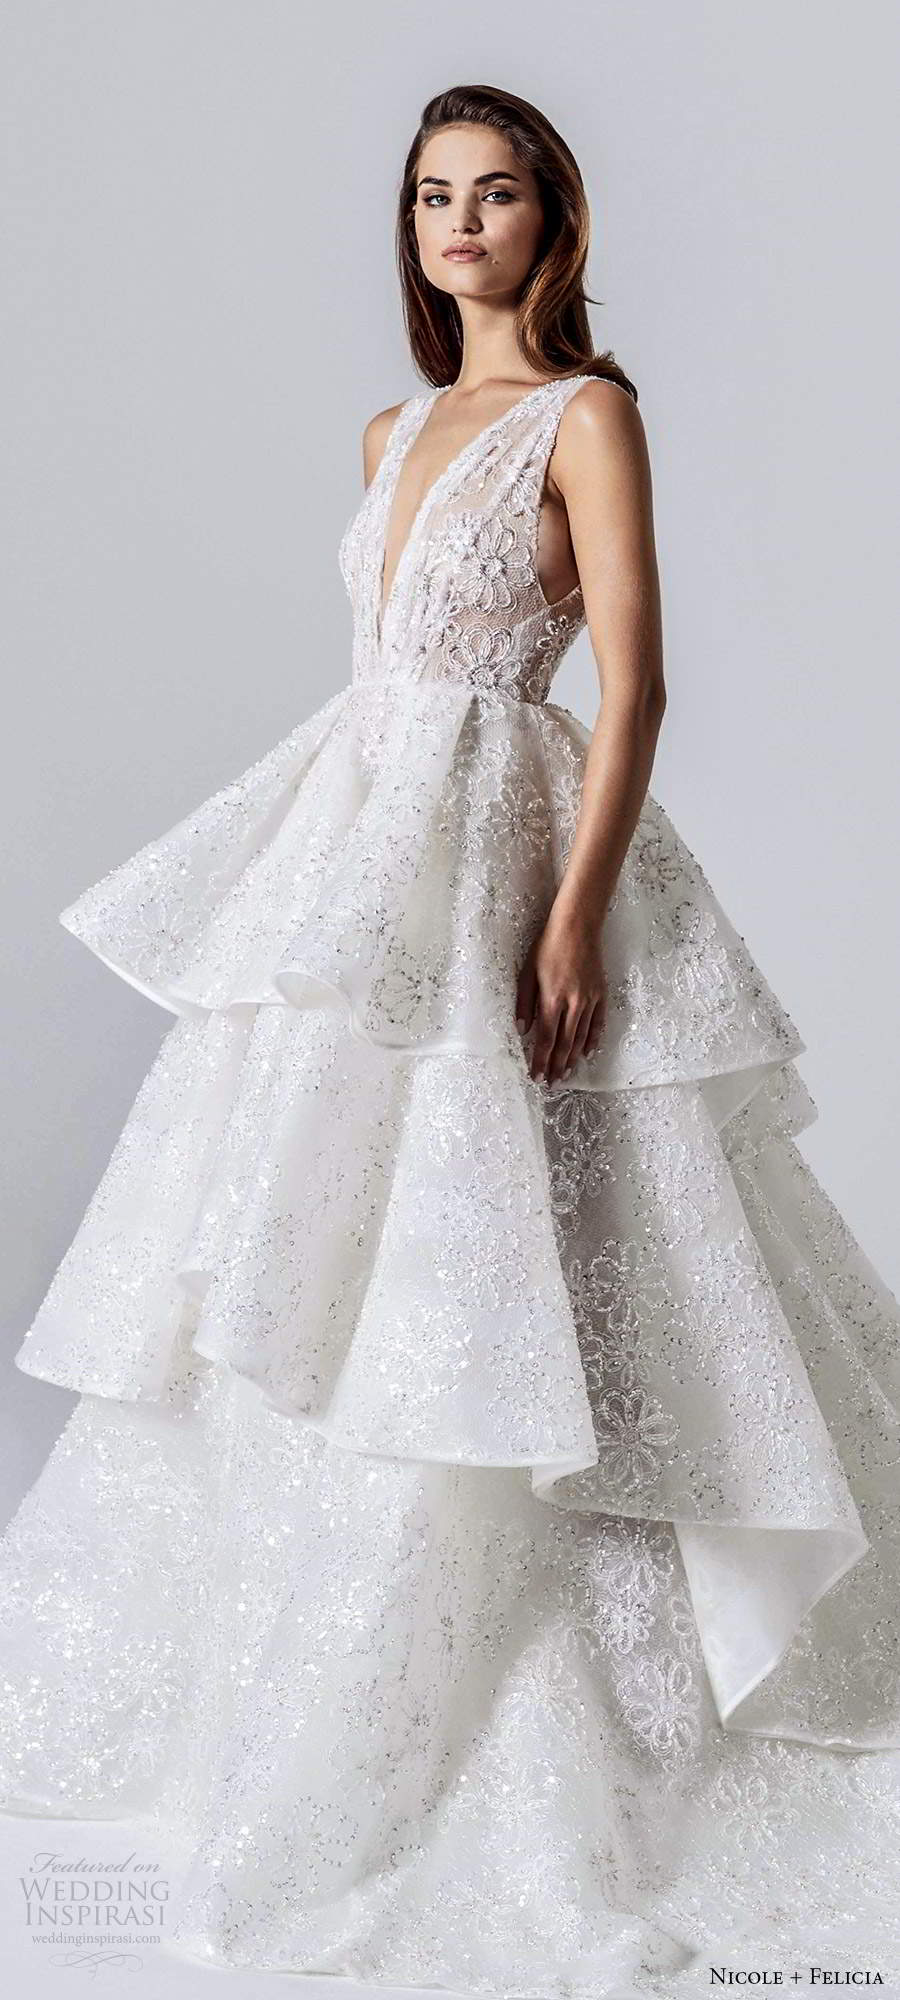 nicole and felicia fall 2020 bridal sleeveless thick straps plunging v neckline fully embellished a line ball gown wedding dress tiered skirt chapel train (6) mv